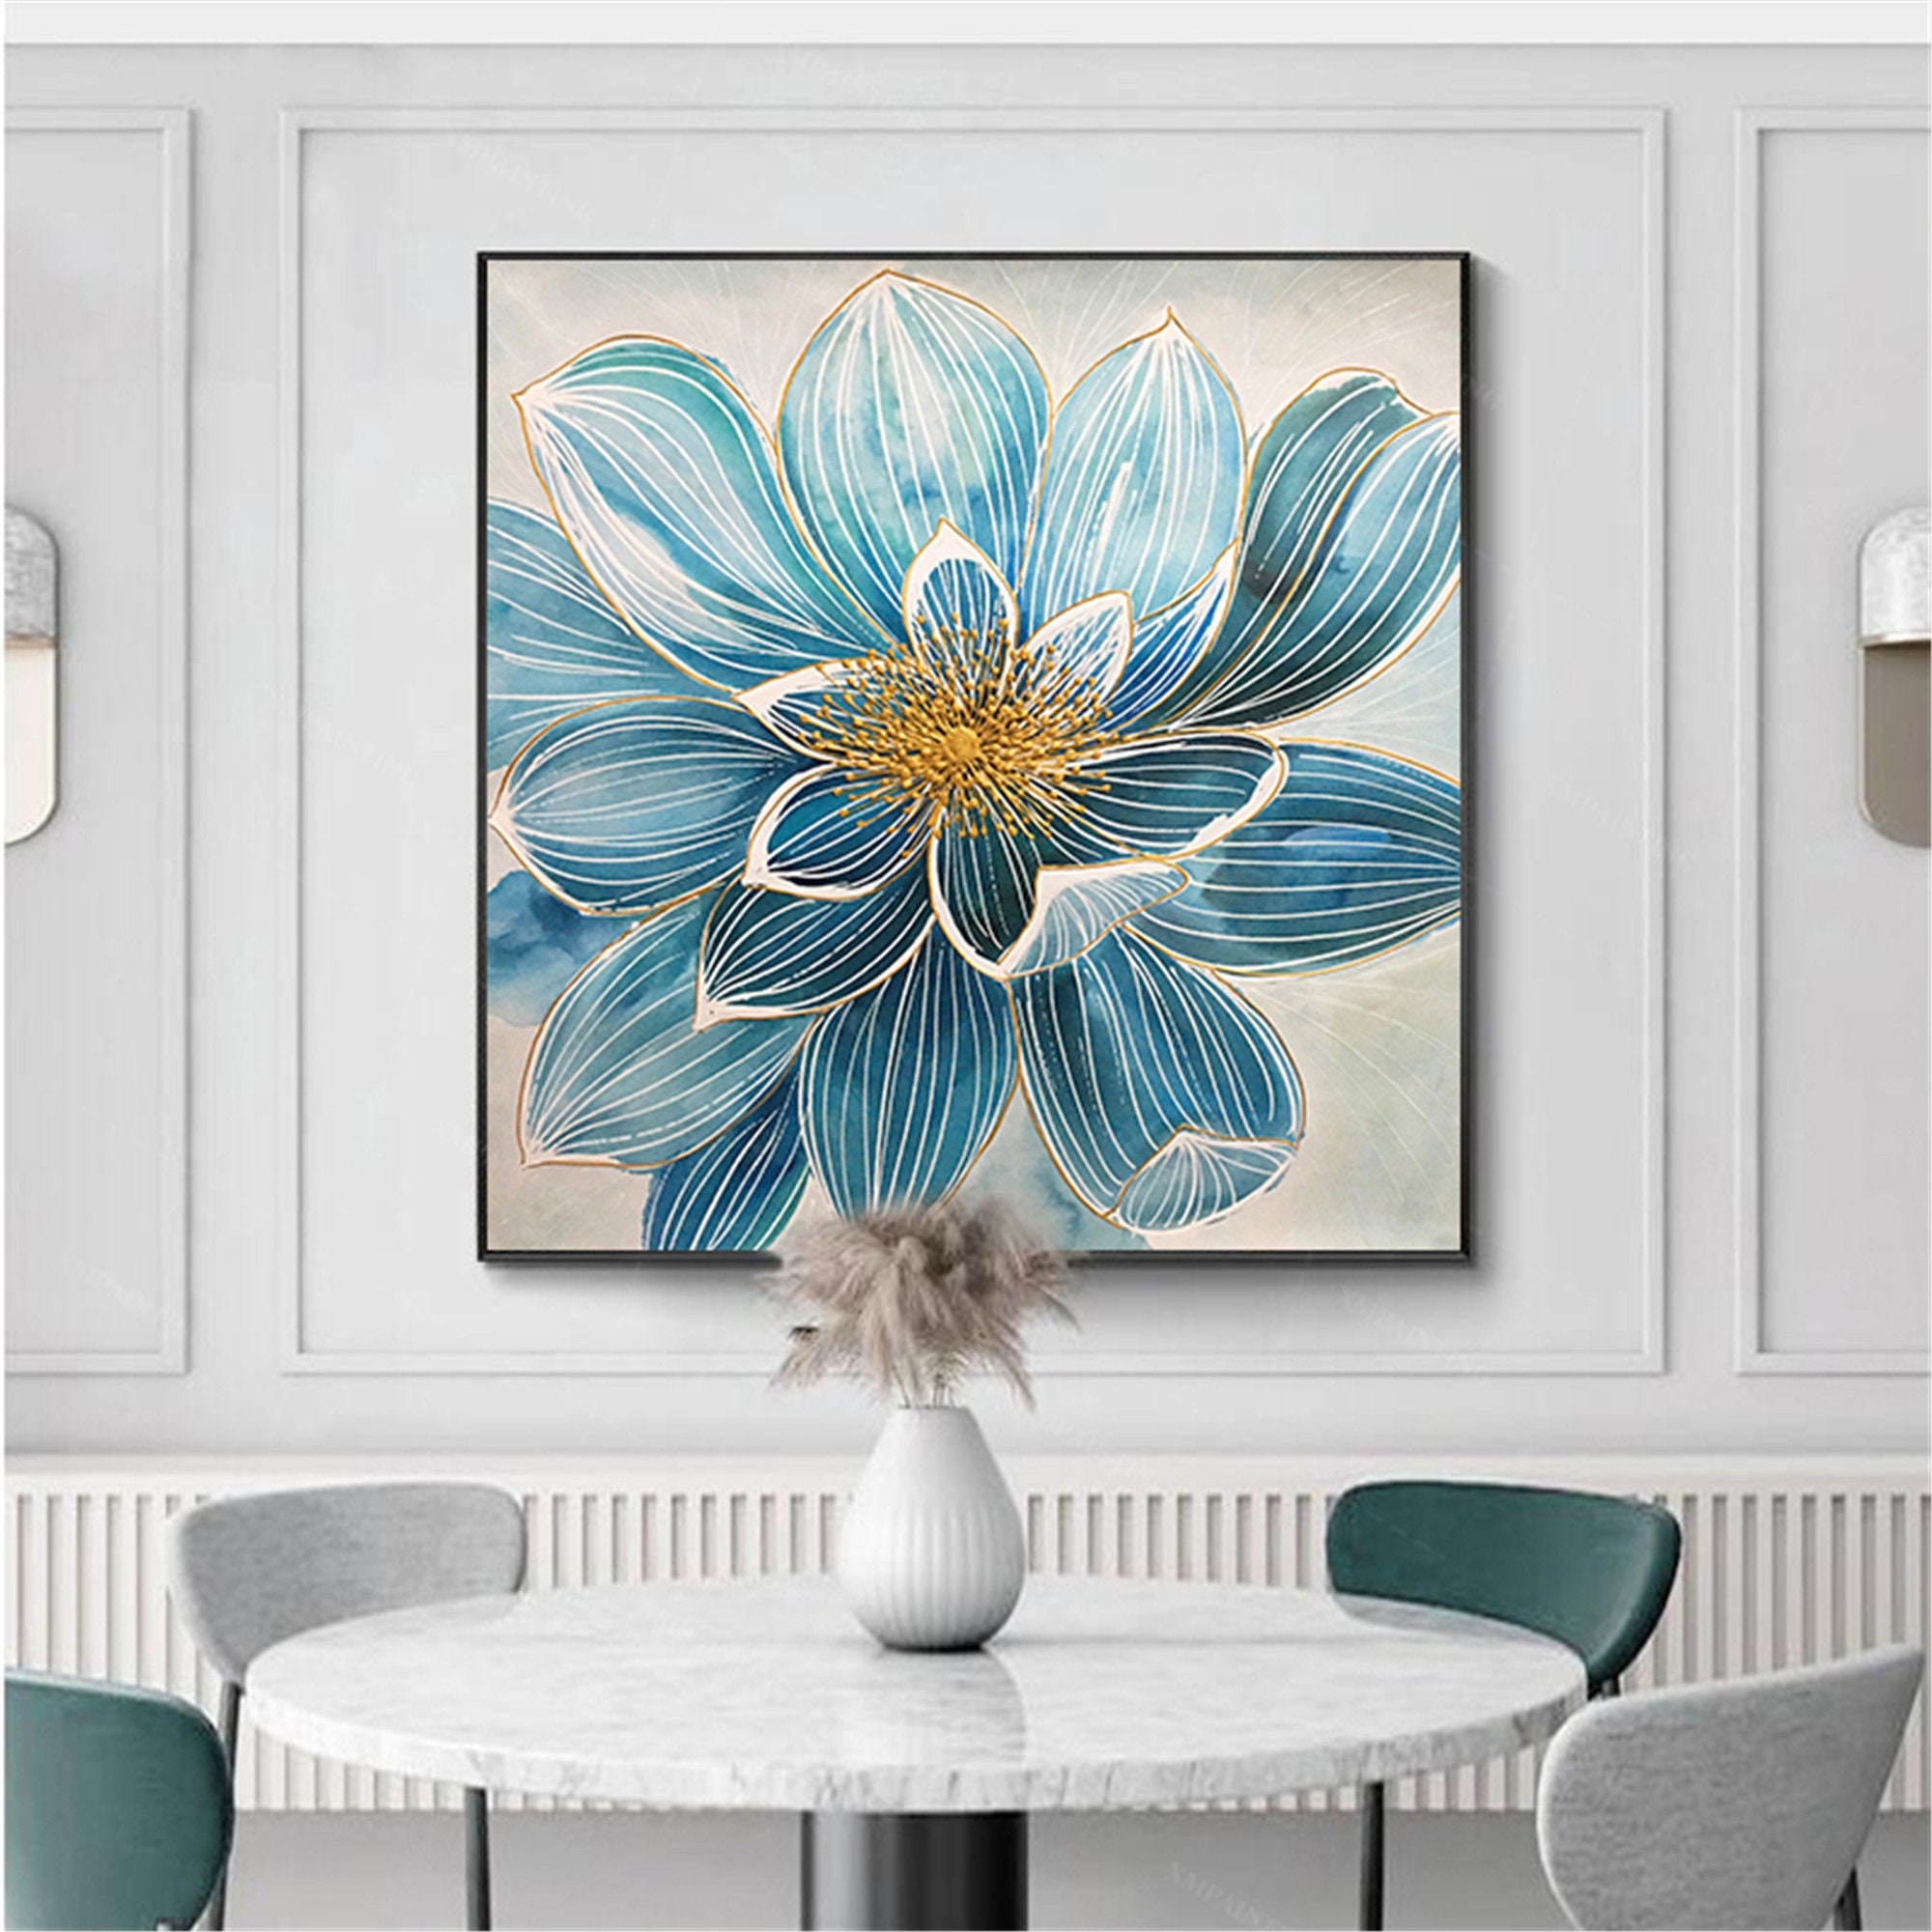 Framed Gold Lines Abstract Flower Painting Handmade Canvas - Etsy